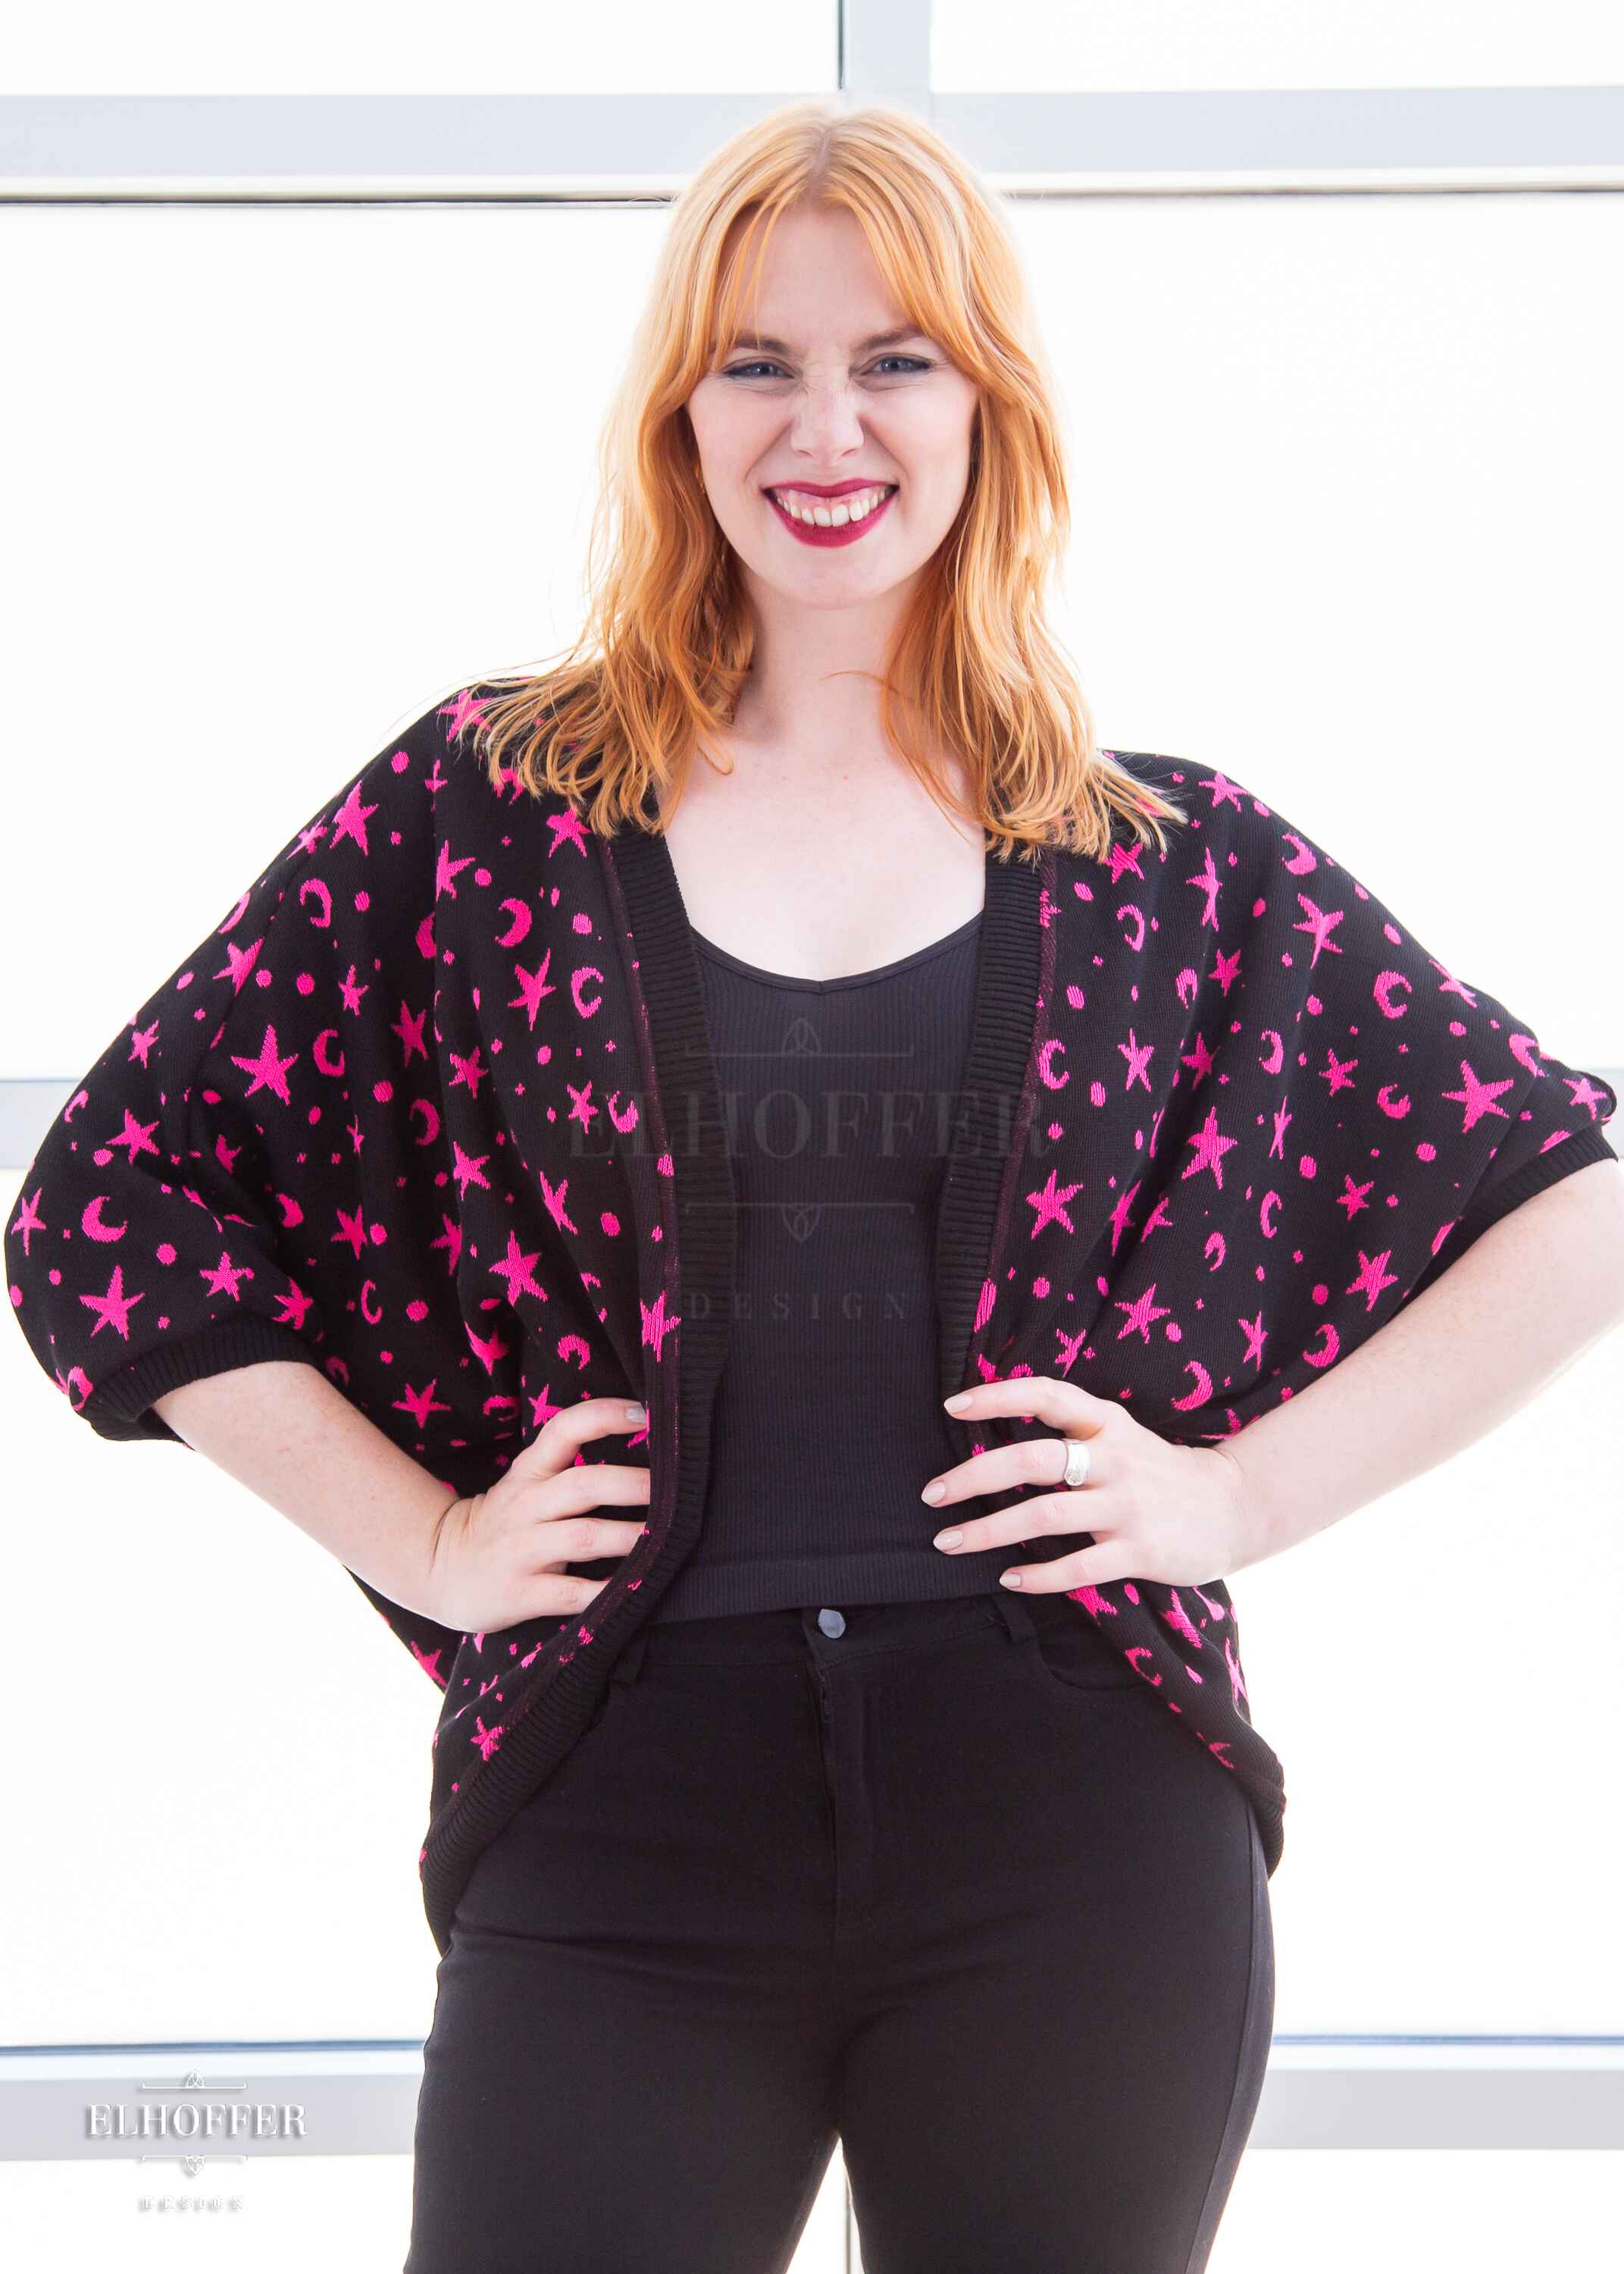 Harley, a fair skinned S model with shoulder length strawberry blonde hair, is smiling while wearing an open front dolman with 3/4 sleeves. The main body of the dolman is black with a bright pink star and moon pattern knit throughout. The edges and cuffs are ribbed in black.